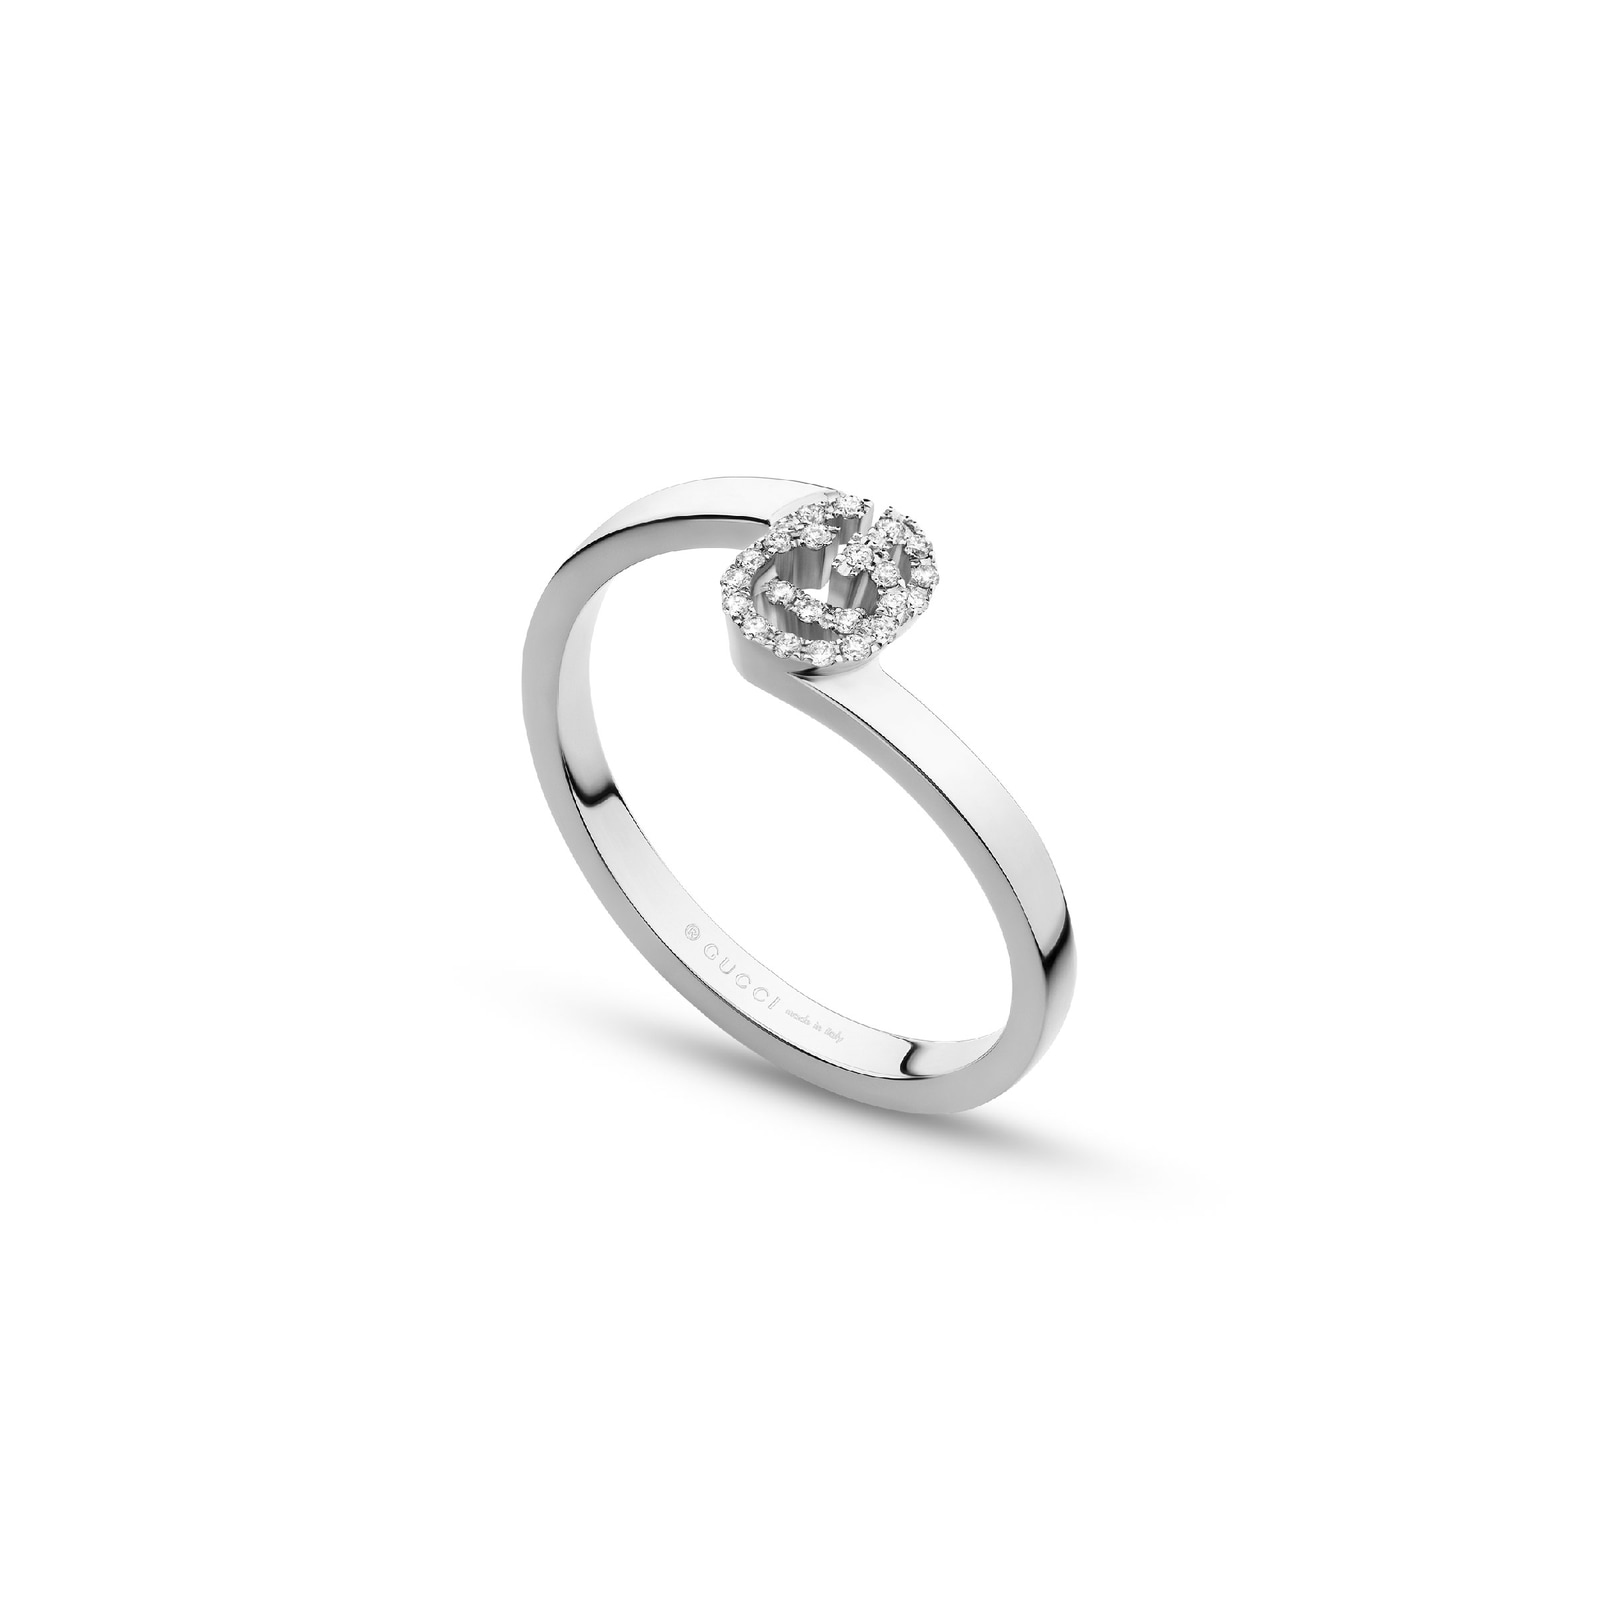 Running G Ring In 18ct White Gold With Diamonds - Ring Size L